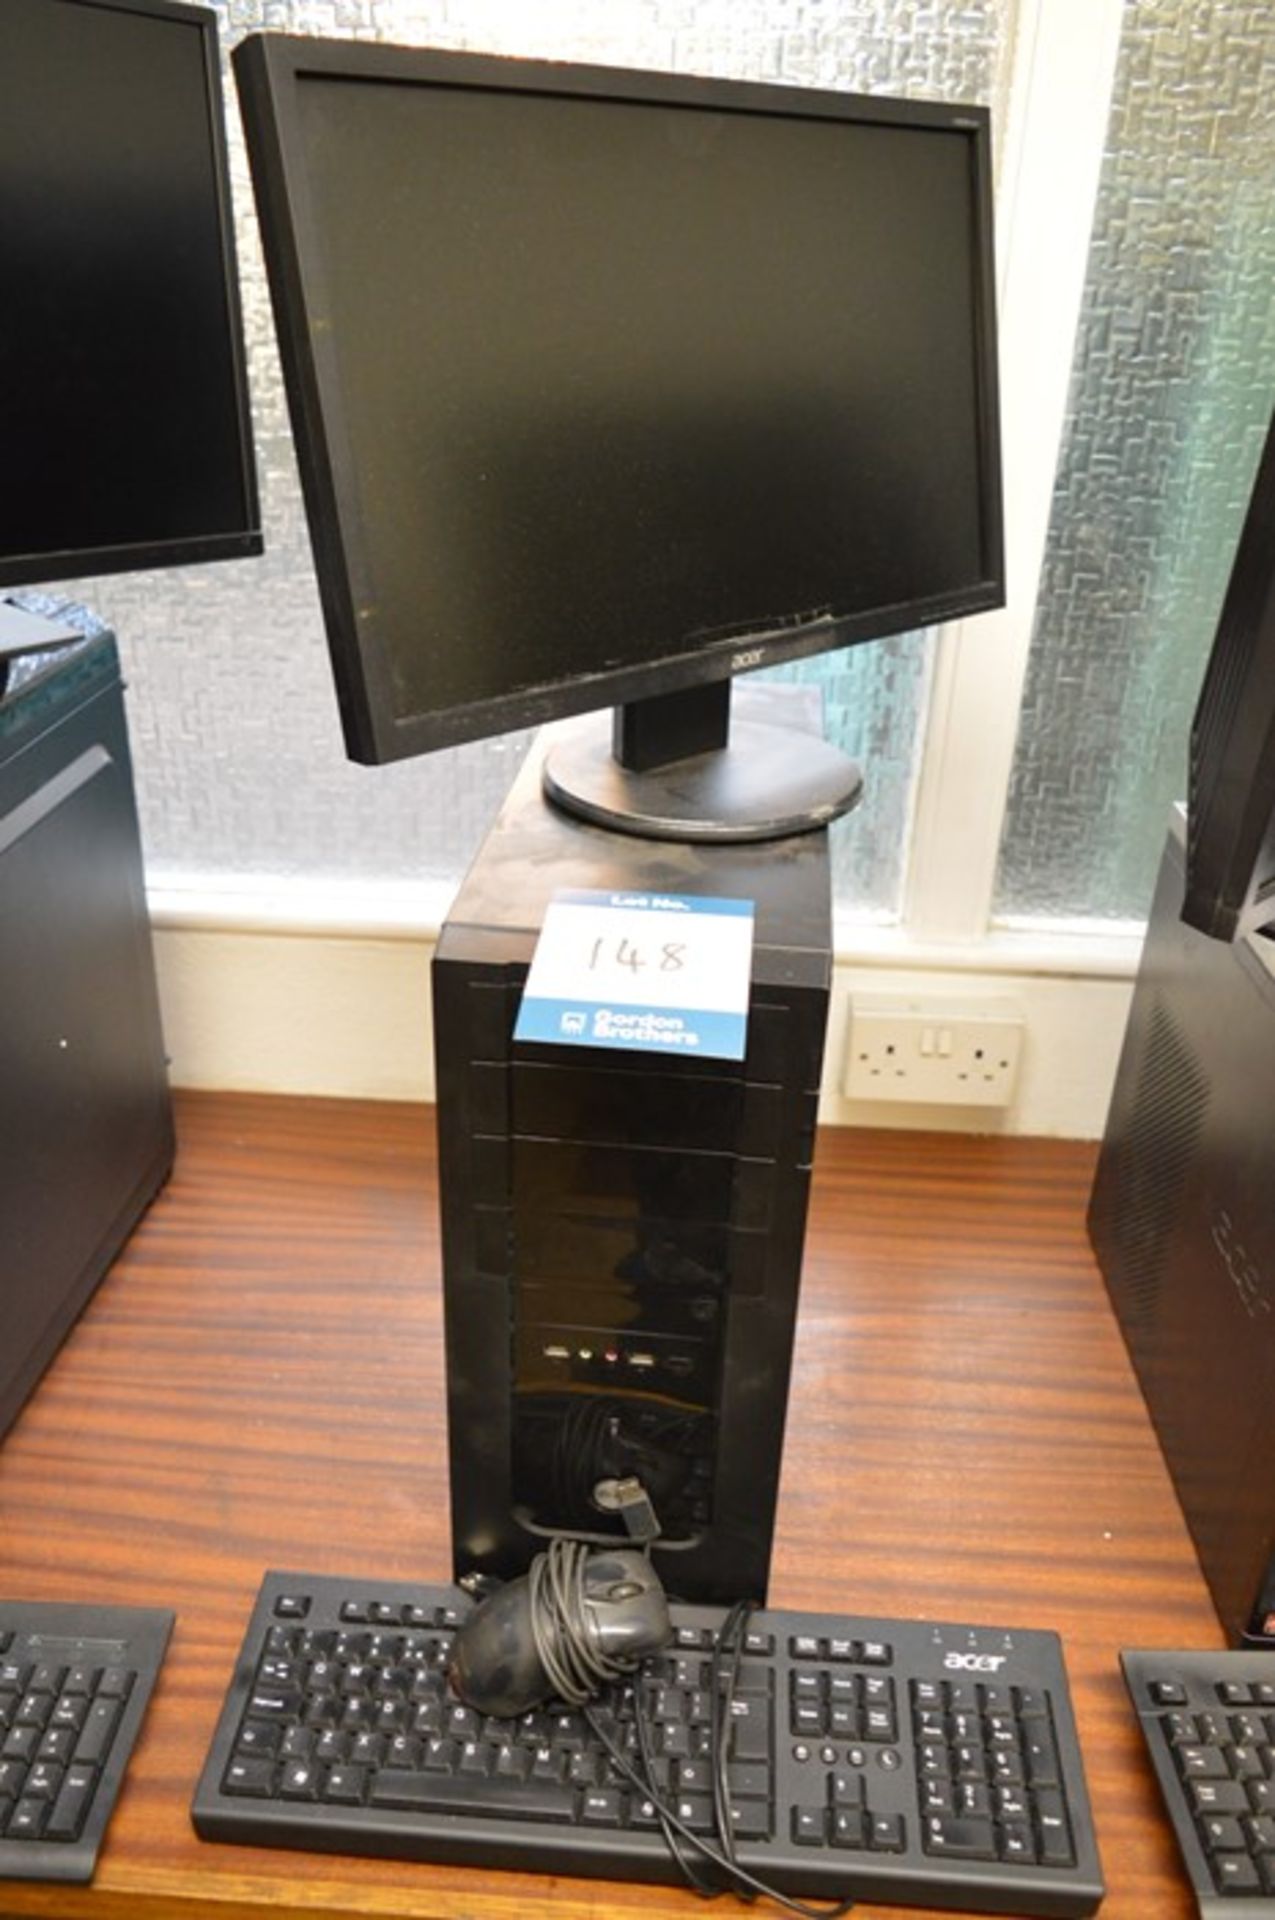 Vento PC with Acer monitor, keyboard and mouse